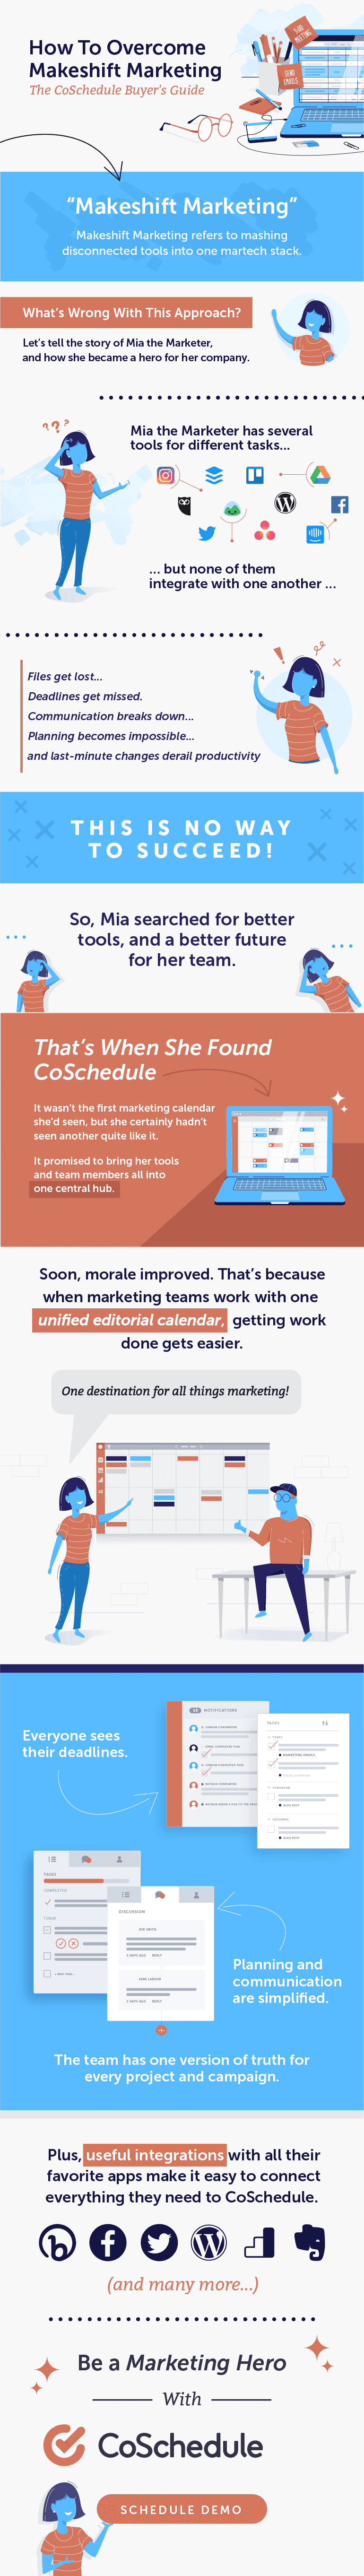 Illustrated Guide to Overcoming Makeshift Marketing